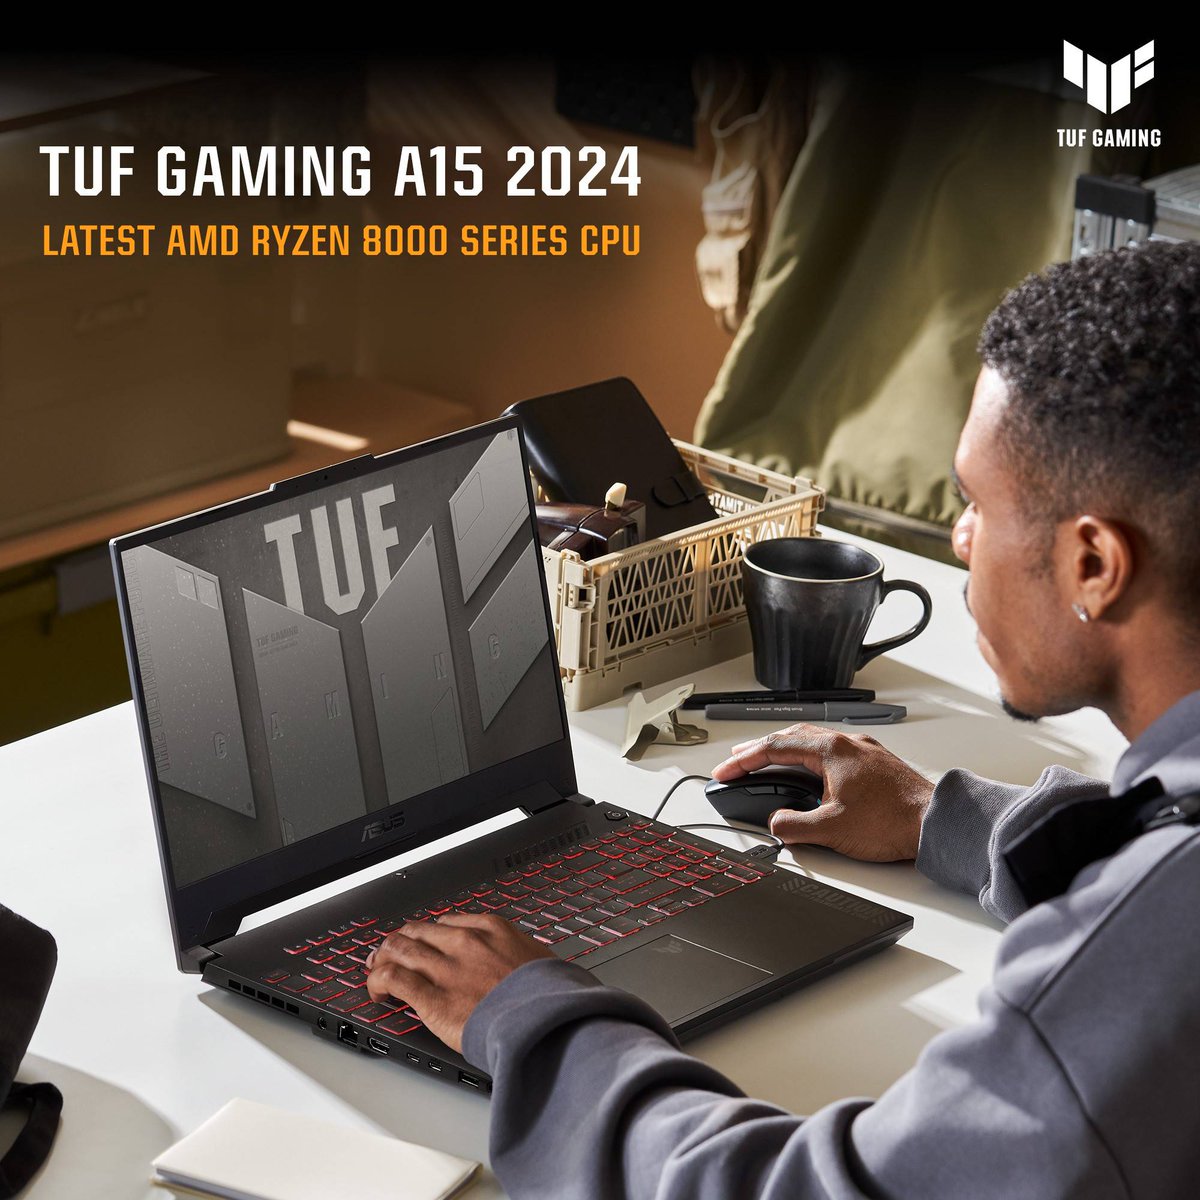 🚀 Power up with the TUF Gaming A15 2024, featuring the latest AMD 8000 series processor! 🎮 Dominate your games with unparalleled speed and performance. 💥 Ready to level up?  💻✨ 

Check out the ultimate gaming machine now - in.asus.click/v3iikn

#ASUSIndia #TUFgaming